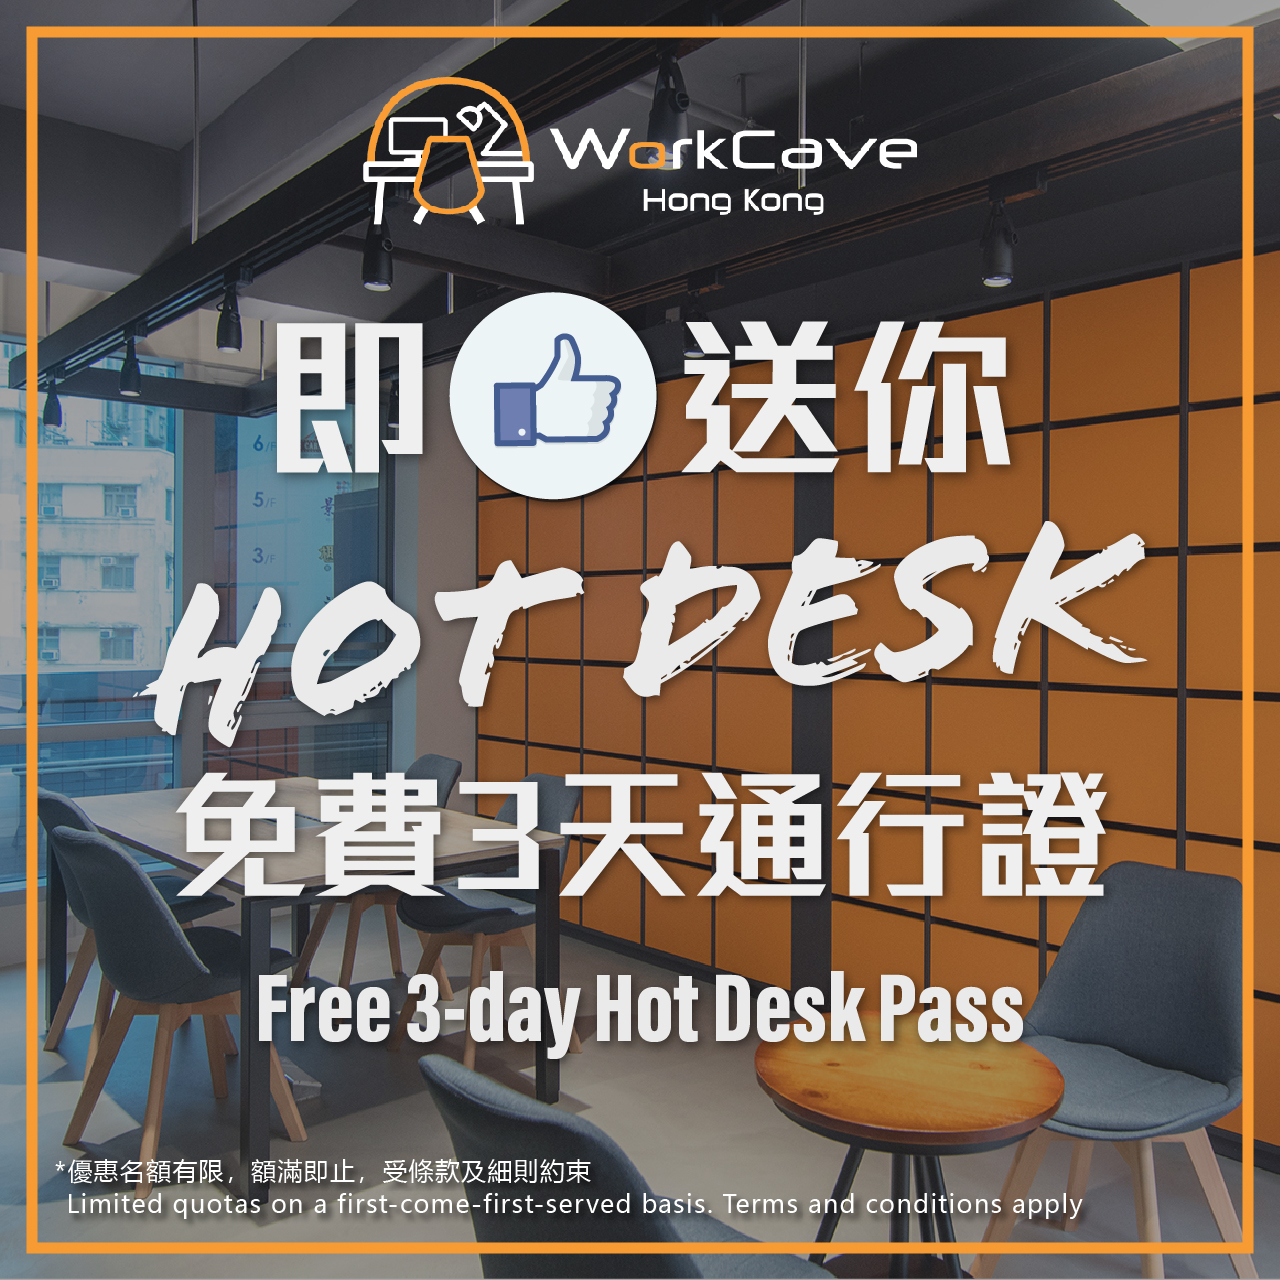 Like WorkCave on Facebook for Hot Desk 3-day Free Trial